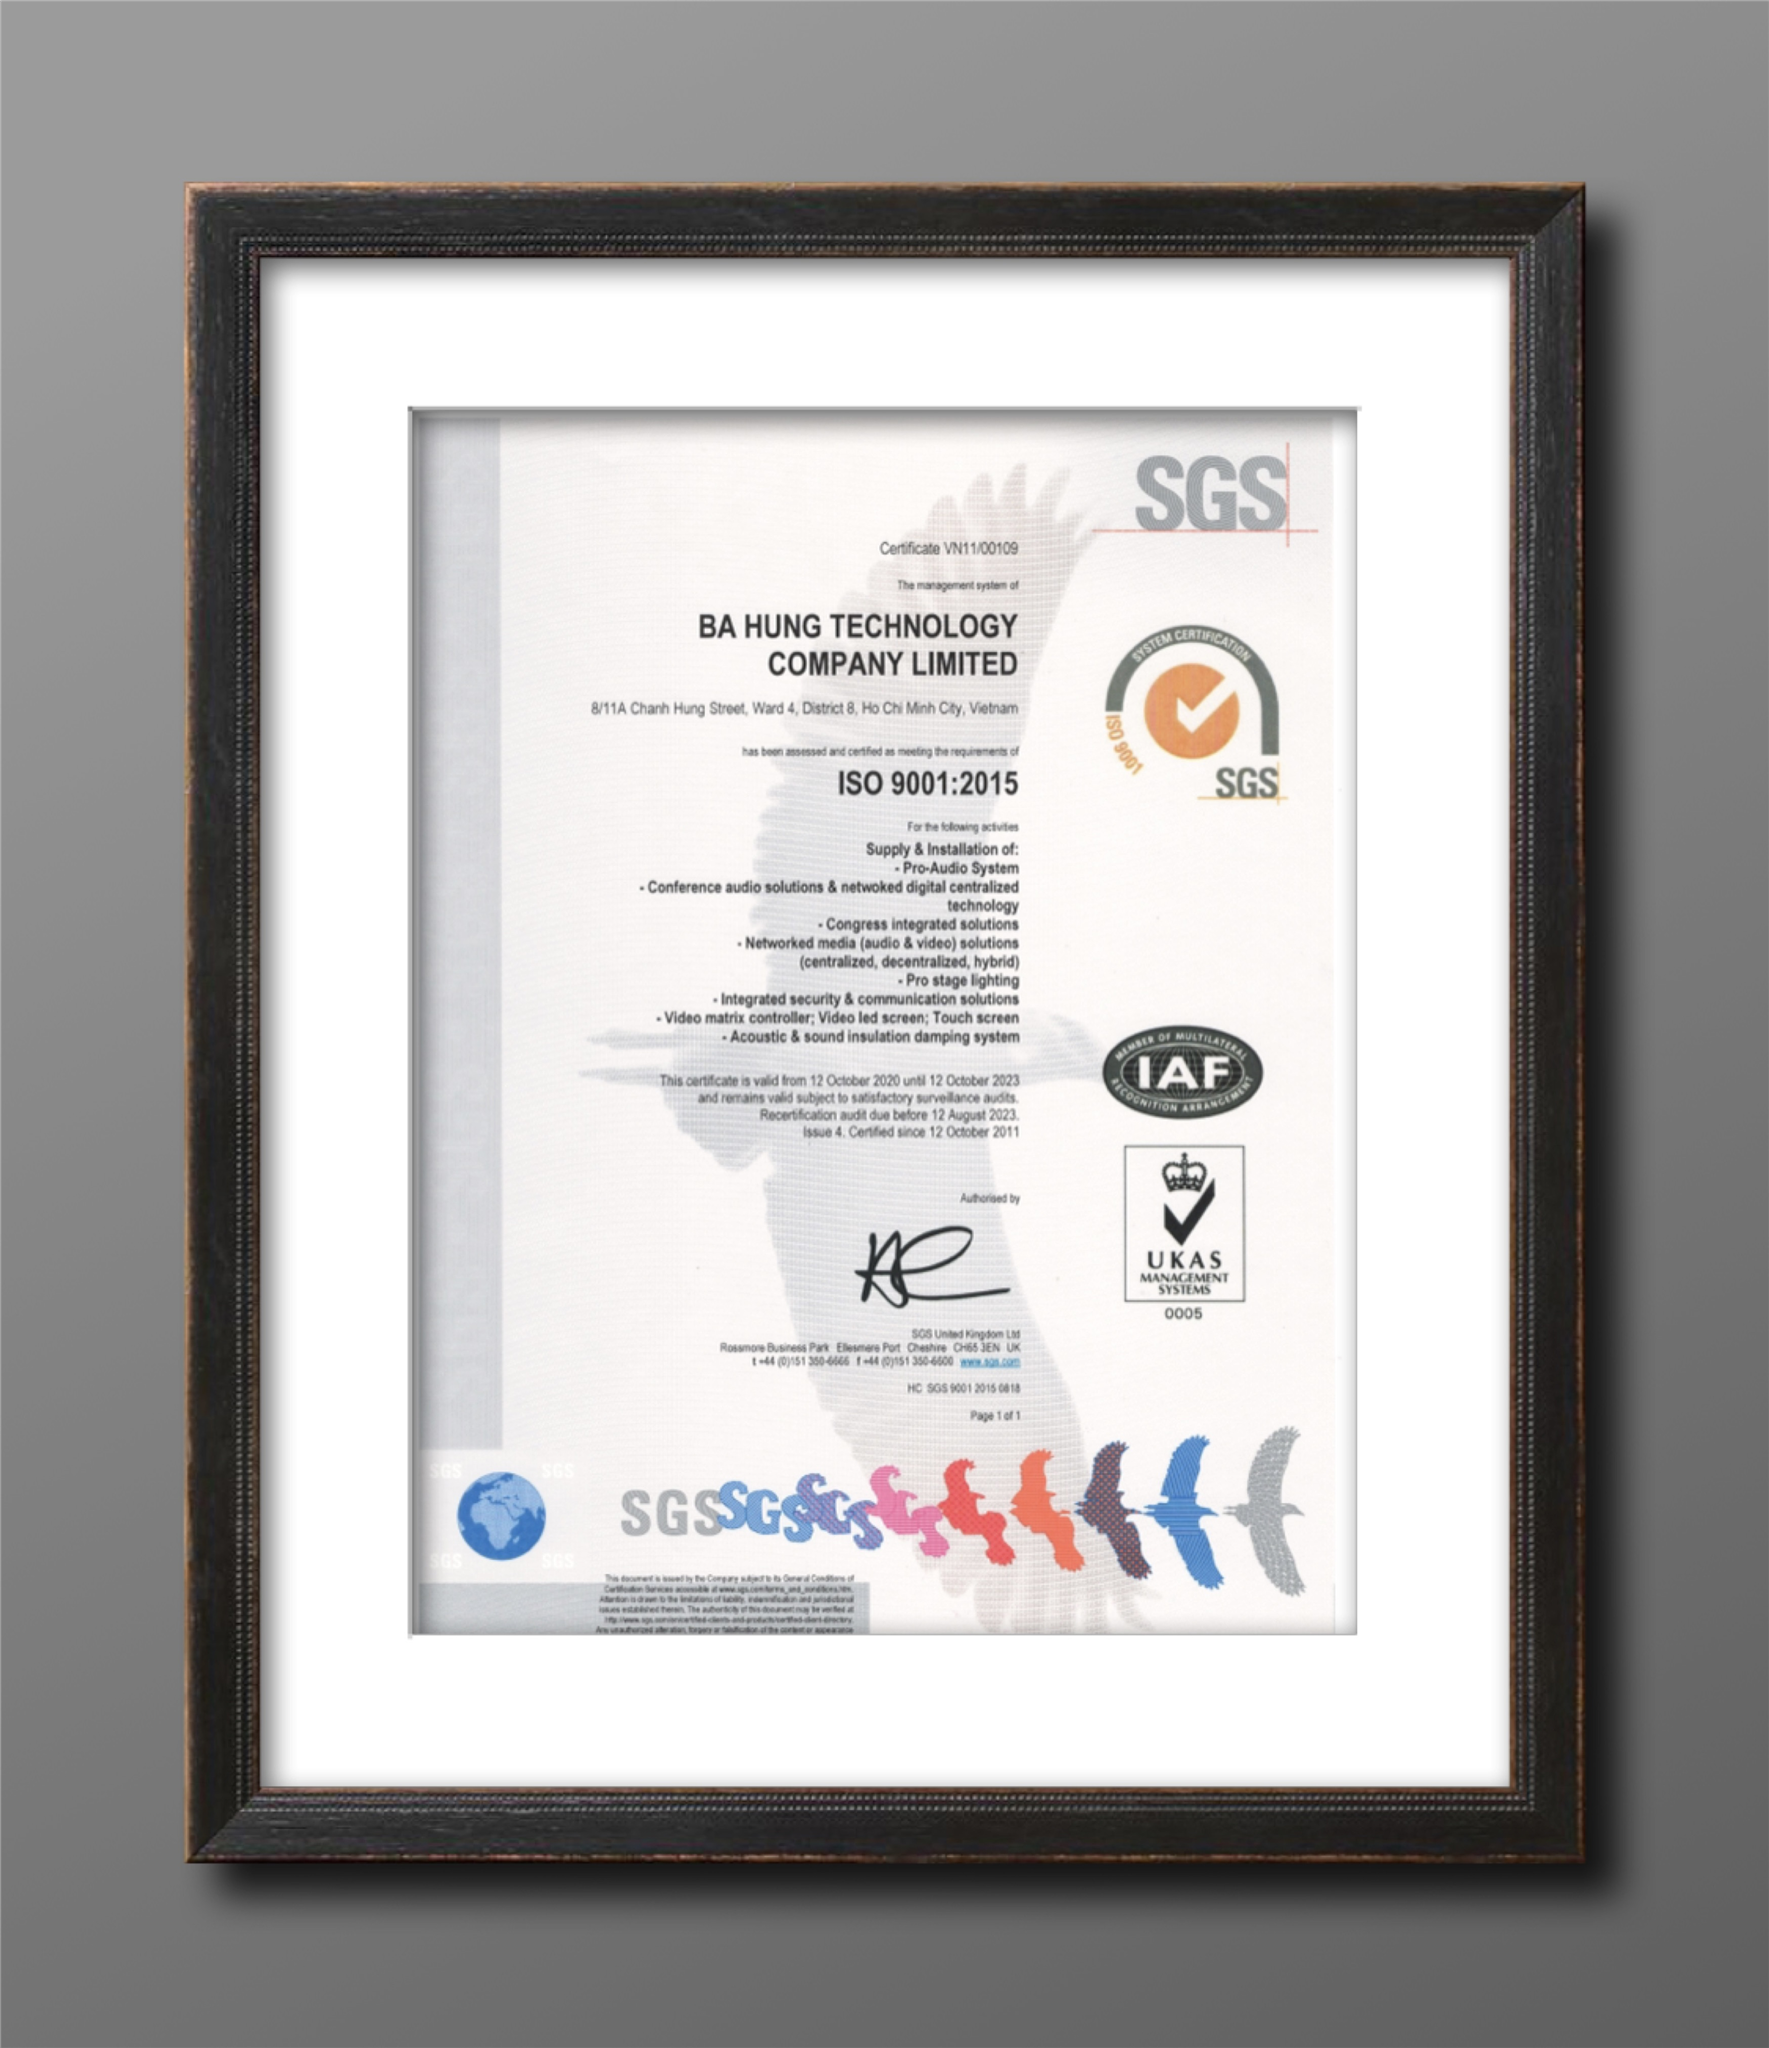 ISO 9001:2015 - Until 2020